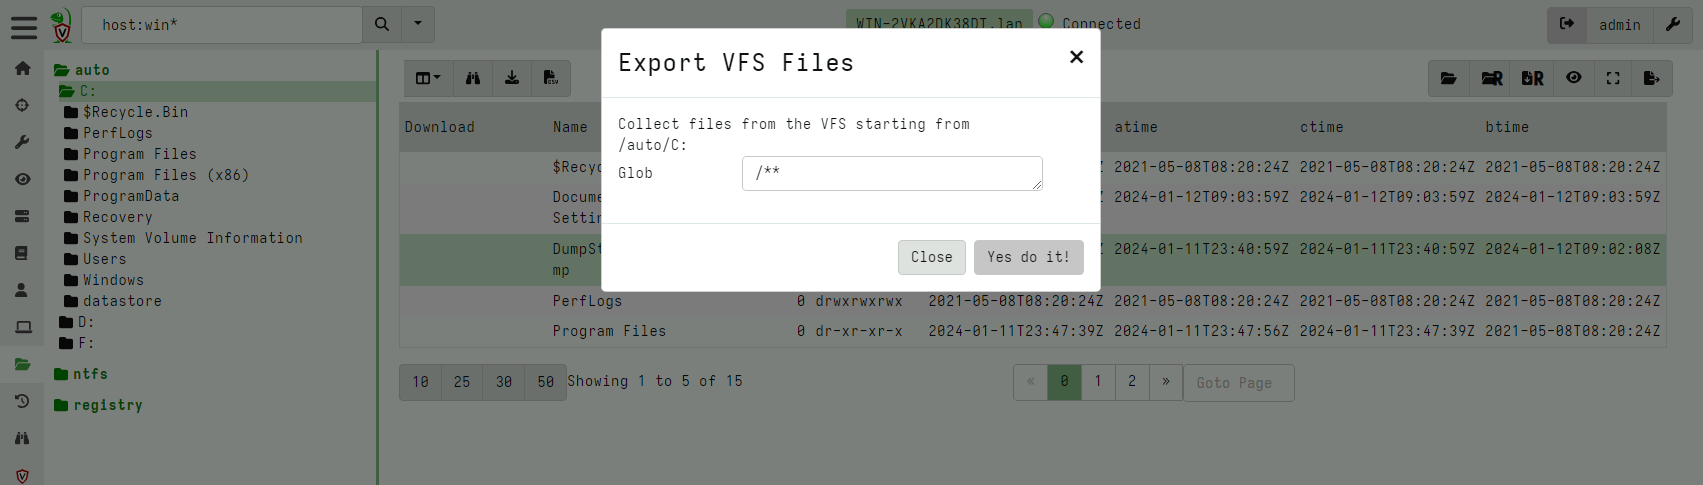 Exporting files from the VFS